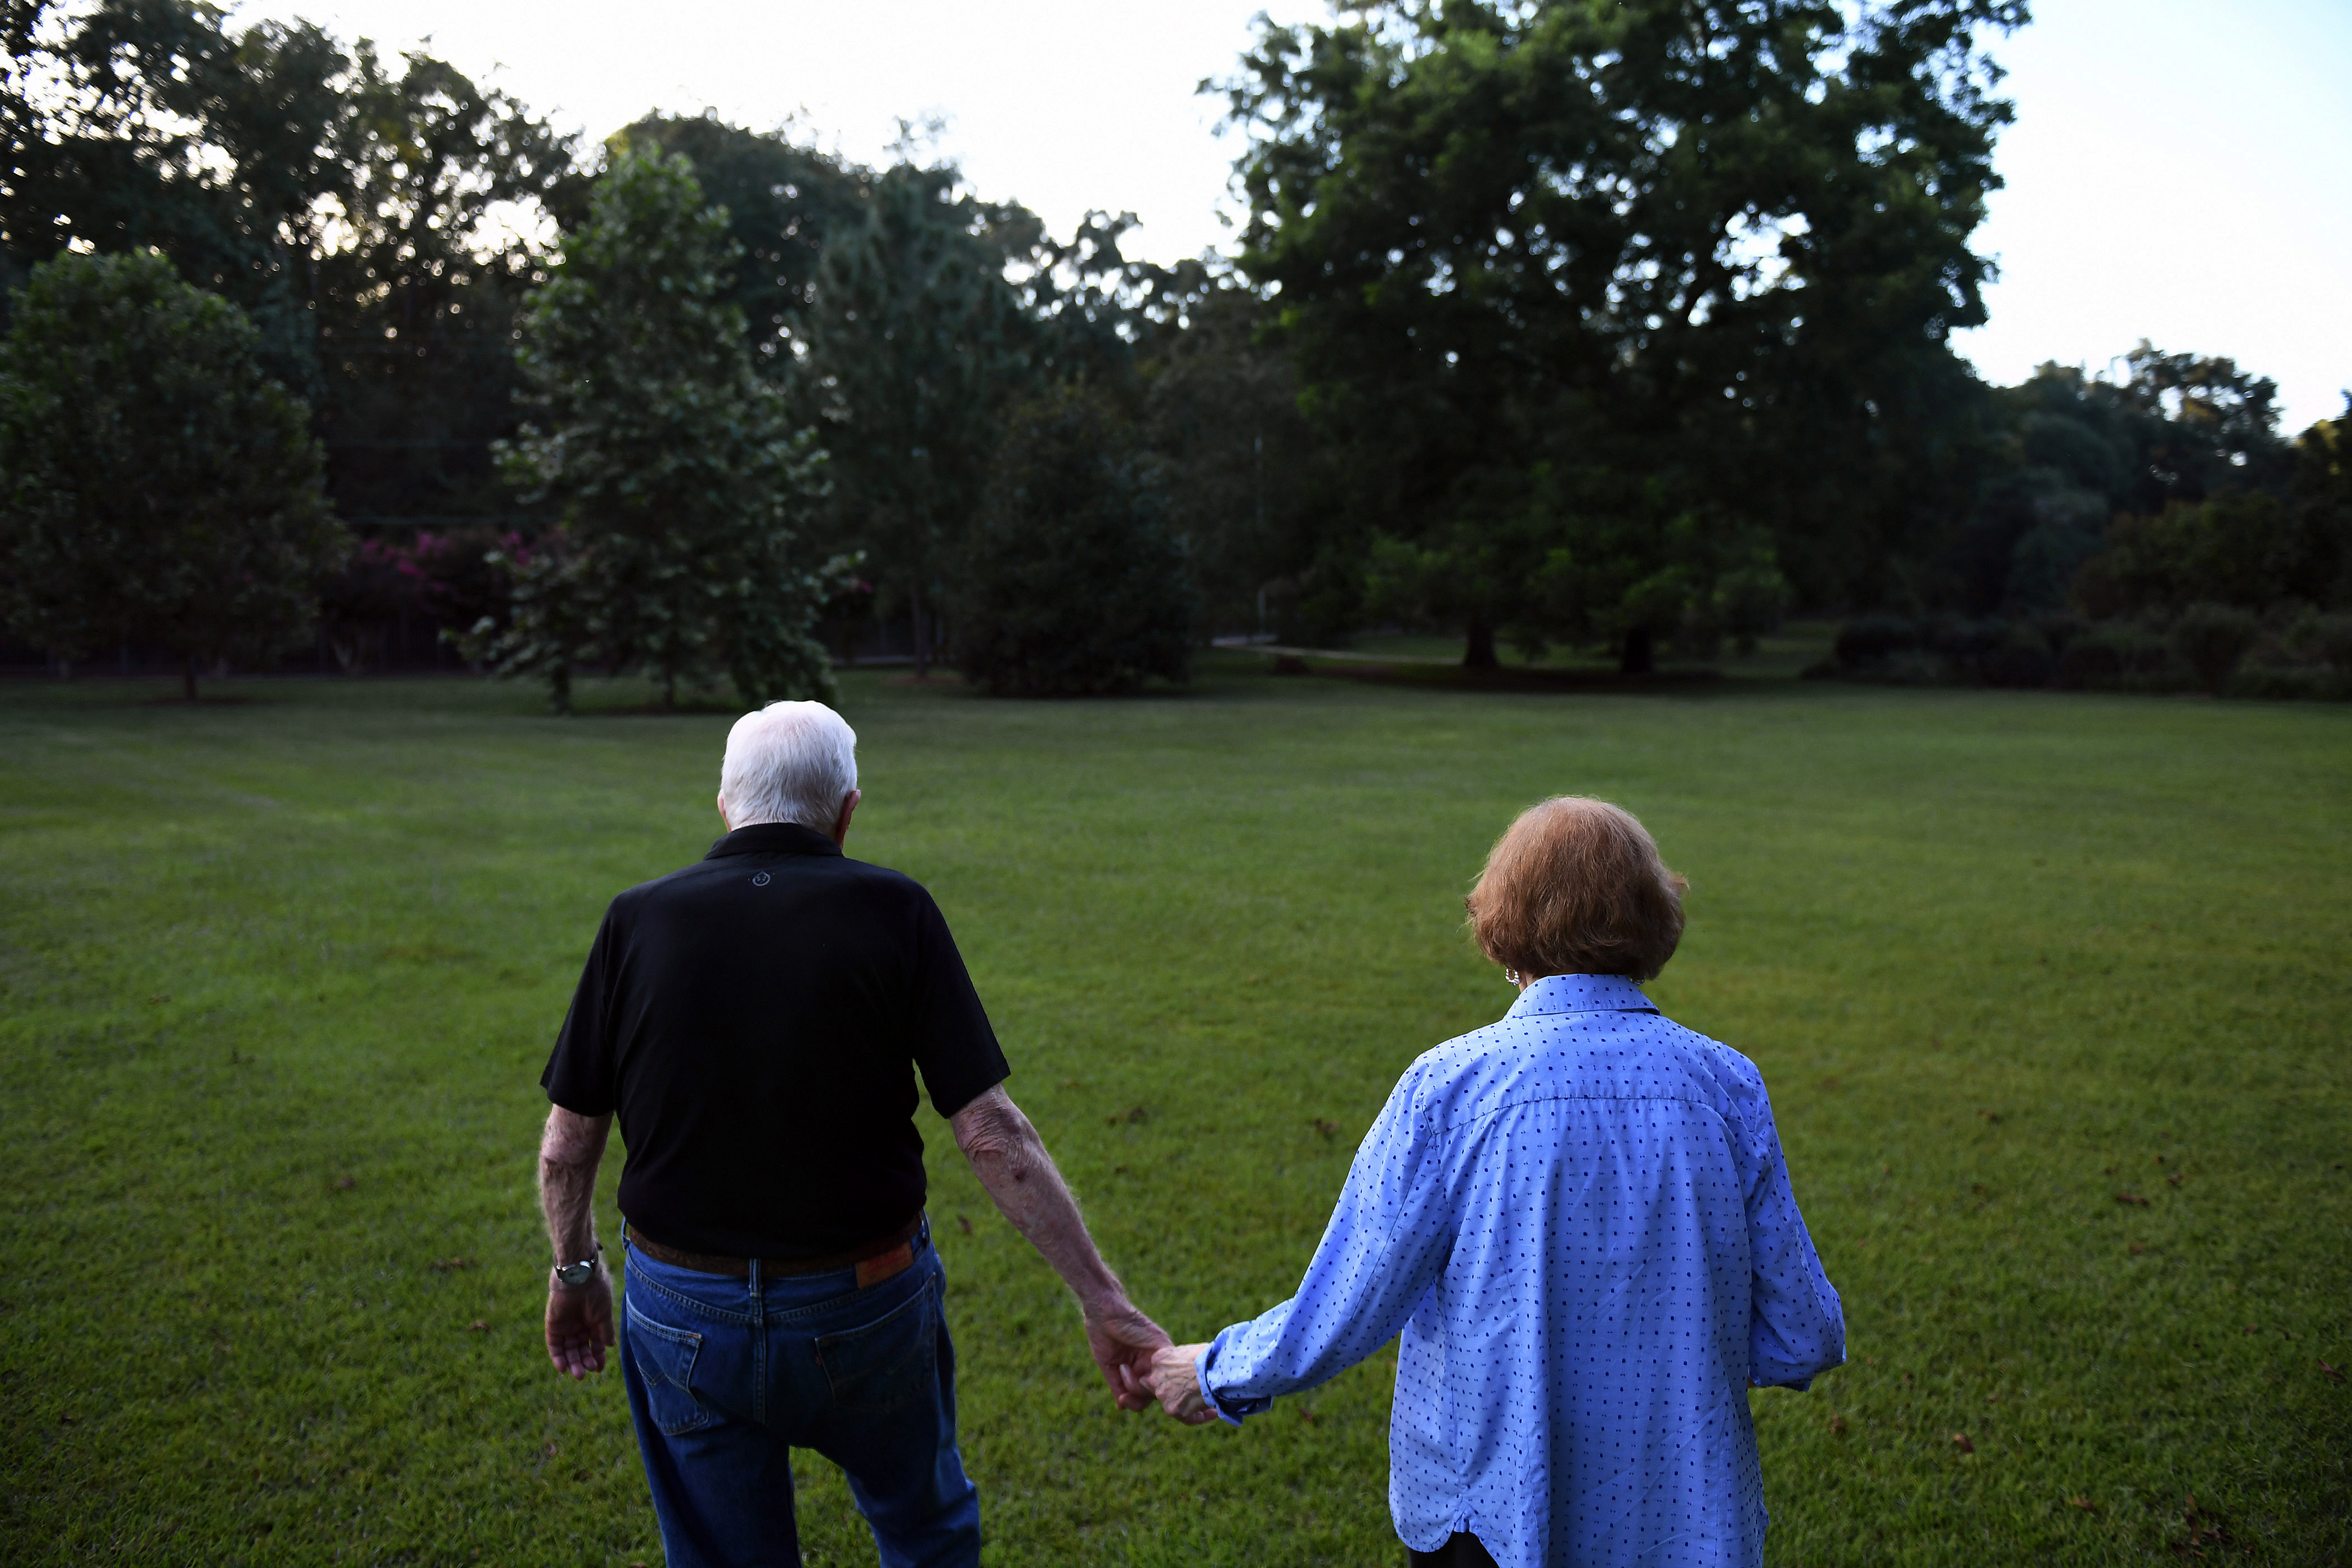 Former U.S. President Jimmy Carter and former U.S. First Lady Rosalynn Carter walking back home from dinner at a friend's house in Plains, Georgia on August 4, 2018 | Source: Getty Images